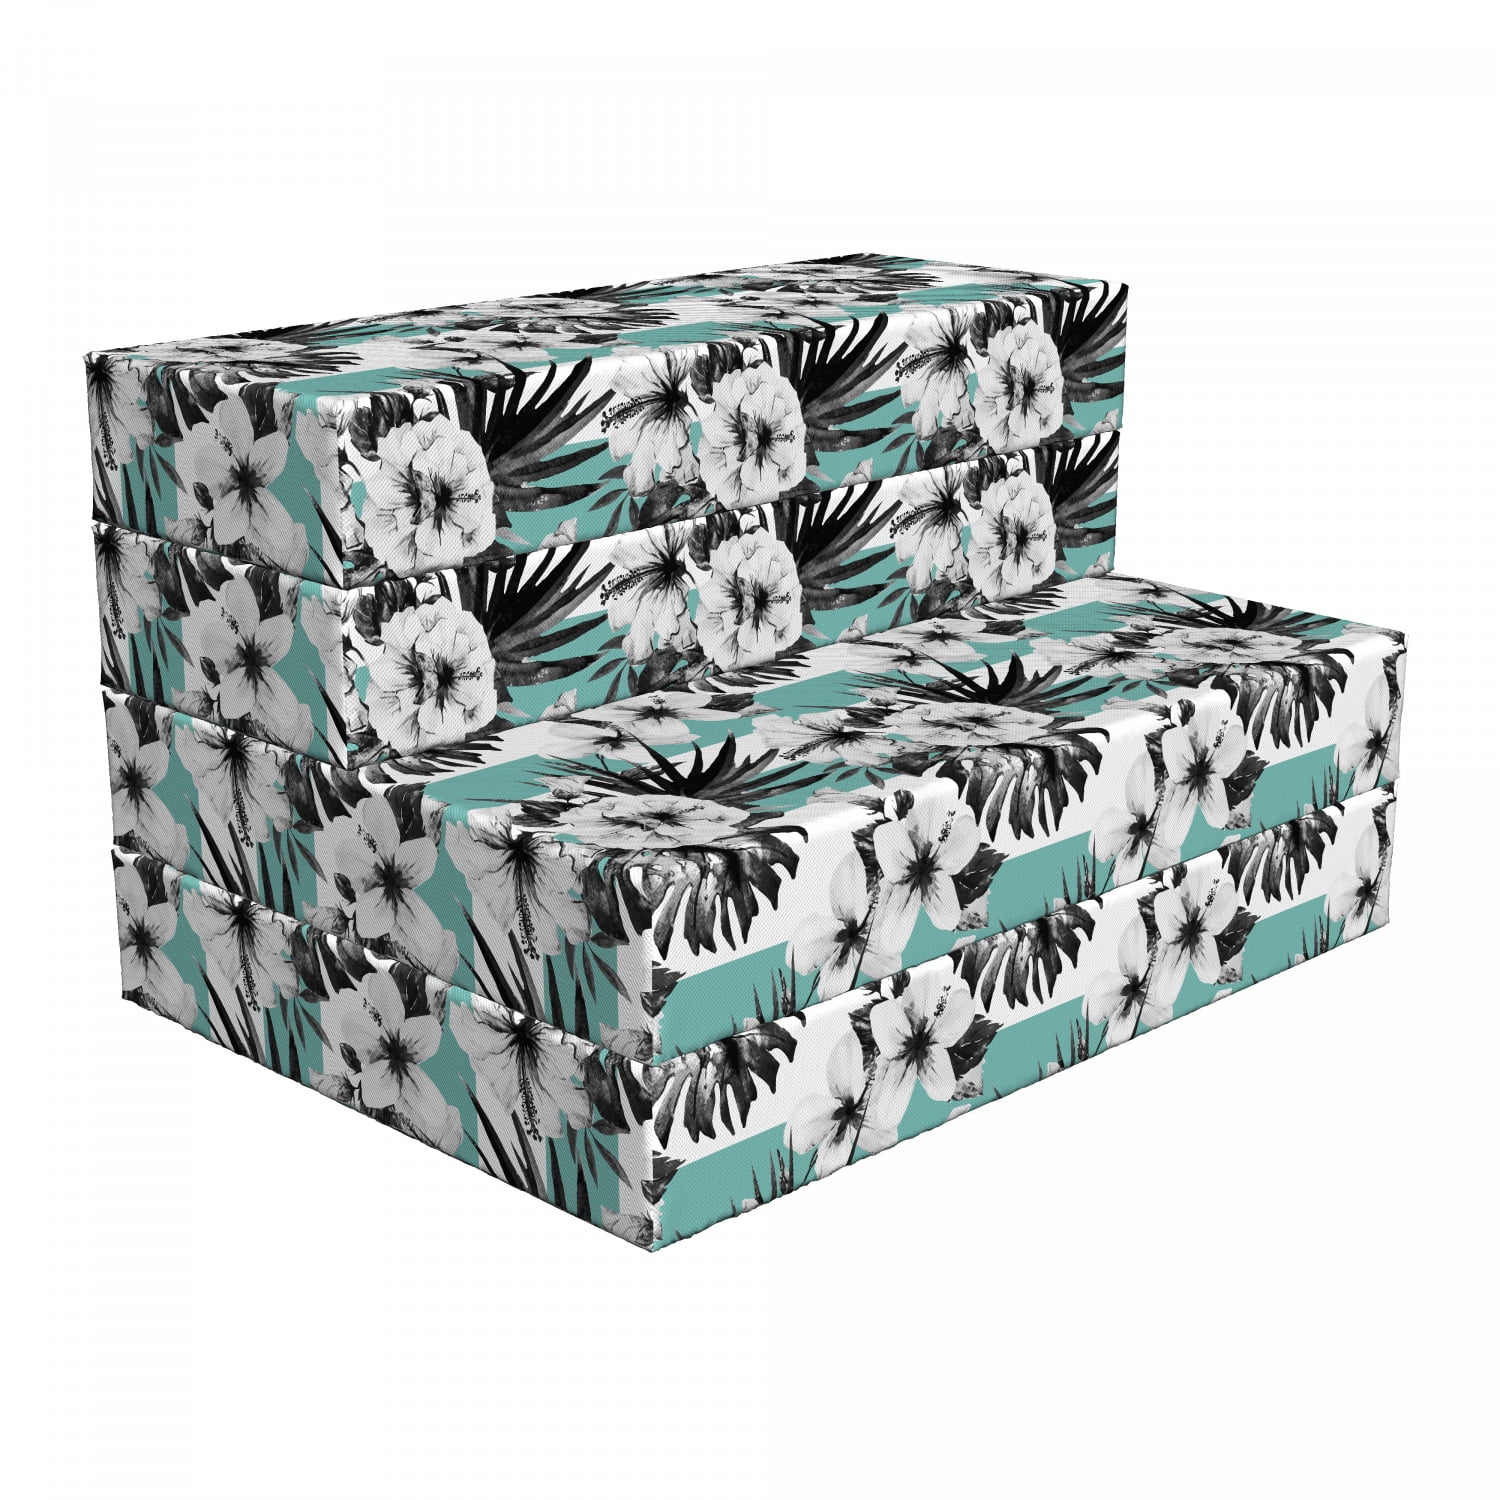 Red Teal 78.7 X 47.2 Ottoman Style Floral Art Ambesonne Teal Foldable Mattress